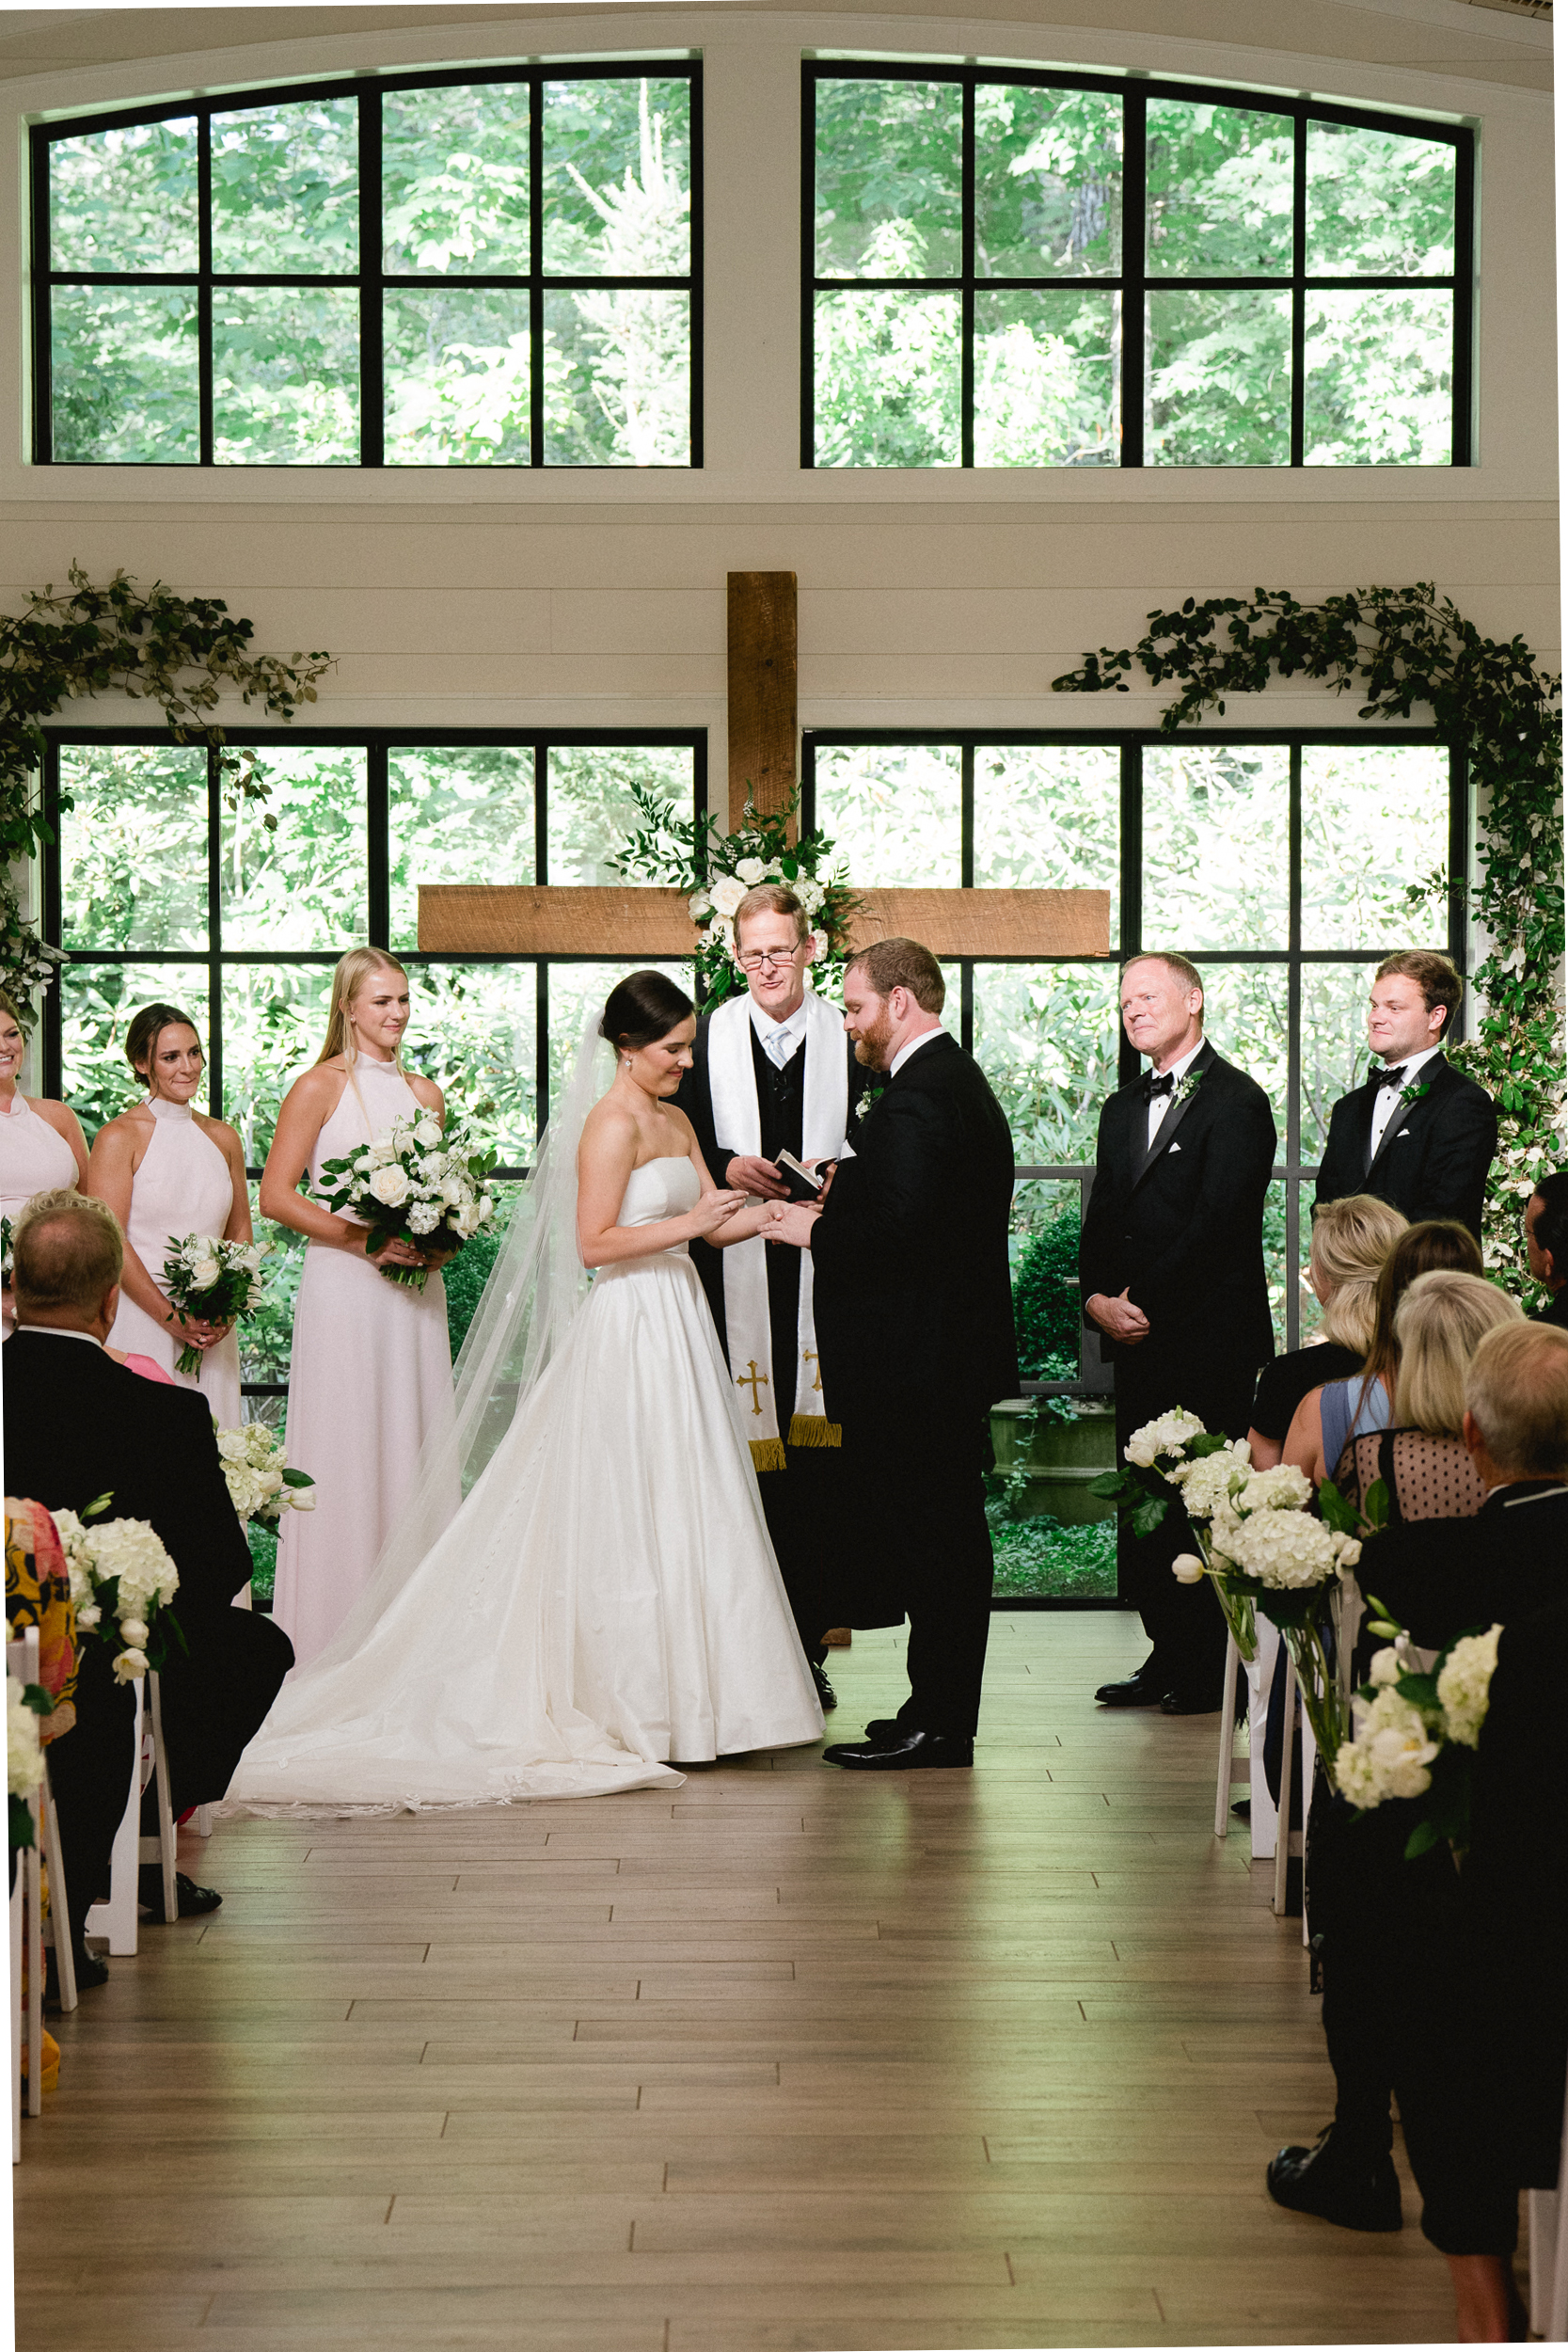 After eight years of courtship, Olivia Schraibman and Patrick McLean said their vows at Old Edwards Inn Orchard House, Highlands, N.C. The backdrop was a wooden cross bedecked with white roses and greenery with a wall of windows showcasing the sun-dappled mountain forest. The wedding party included Ari de Lucy, Nan Davenport, Olivia and Patrick, with the Rev. Brad Smith, Patrick McLean (Patrick’s father), and George Schraibman. 